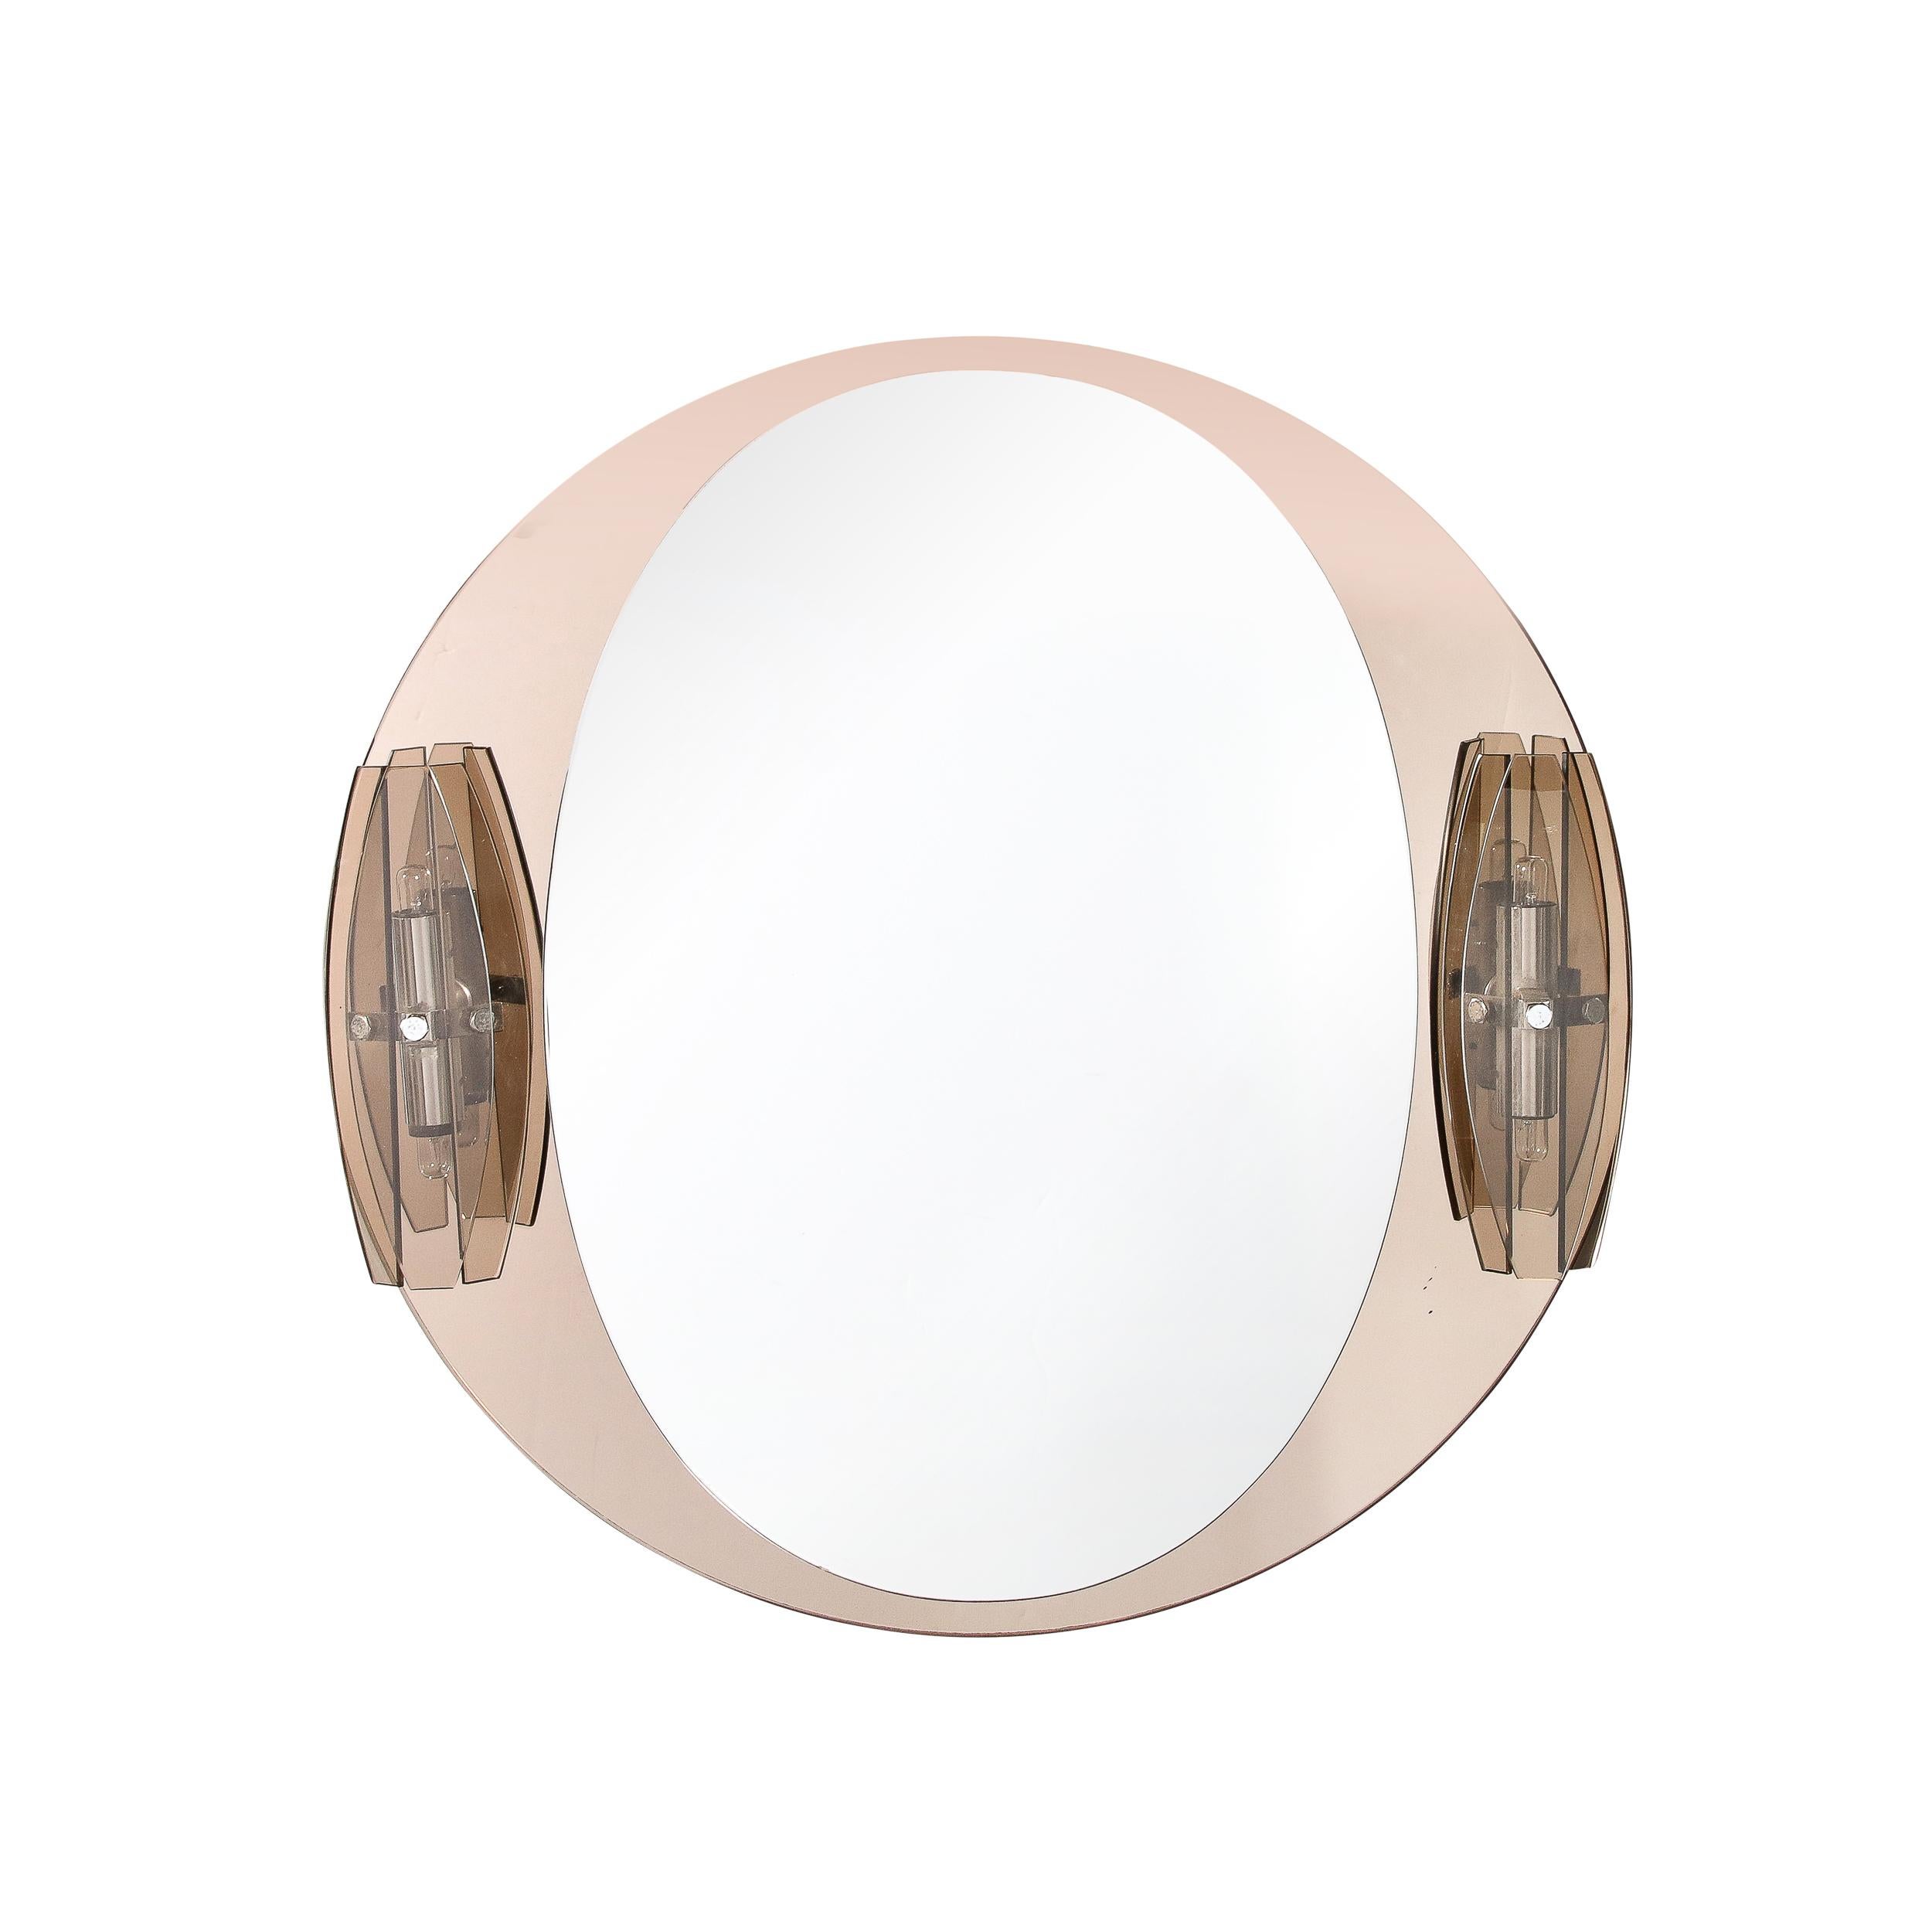 This Mid-Century modernist Illuminated Vanity Mirror was crafted by VECA, originating from Italy, Circa 1970. Composed in Bronzed and Smoked mirror glass with translucent smoked bronze panels shielding the bulbs, this unique sculptural piece is a